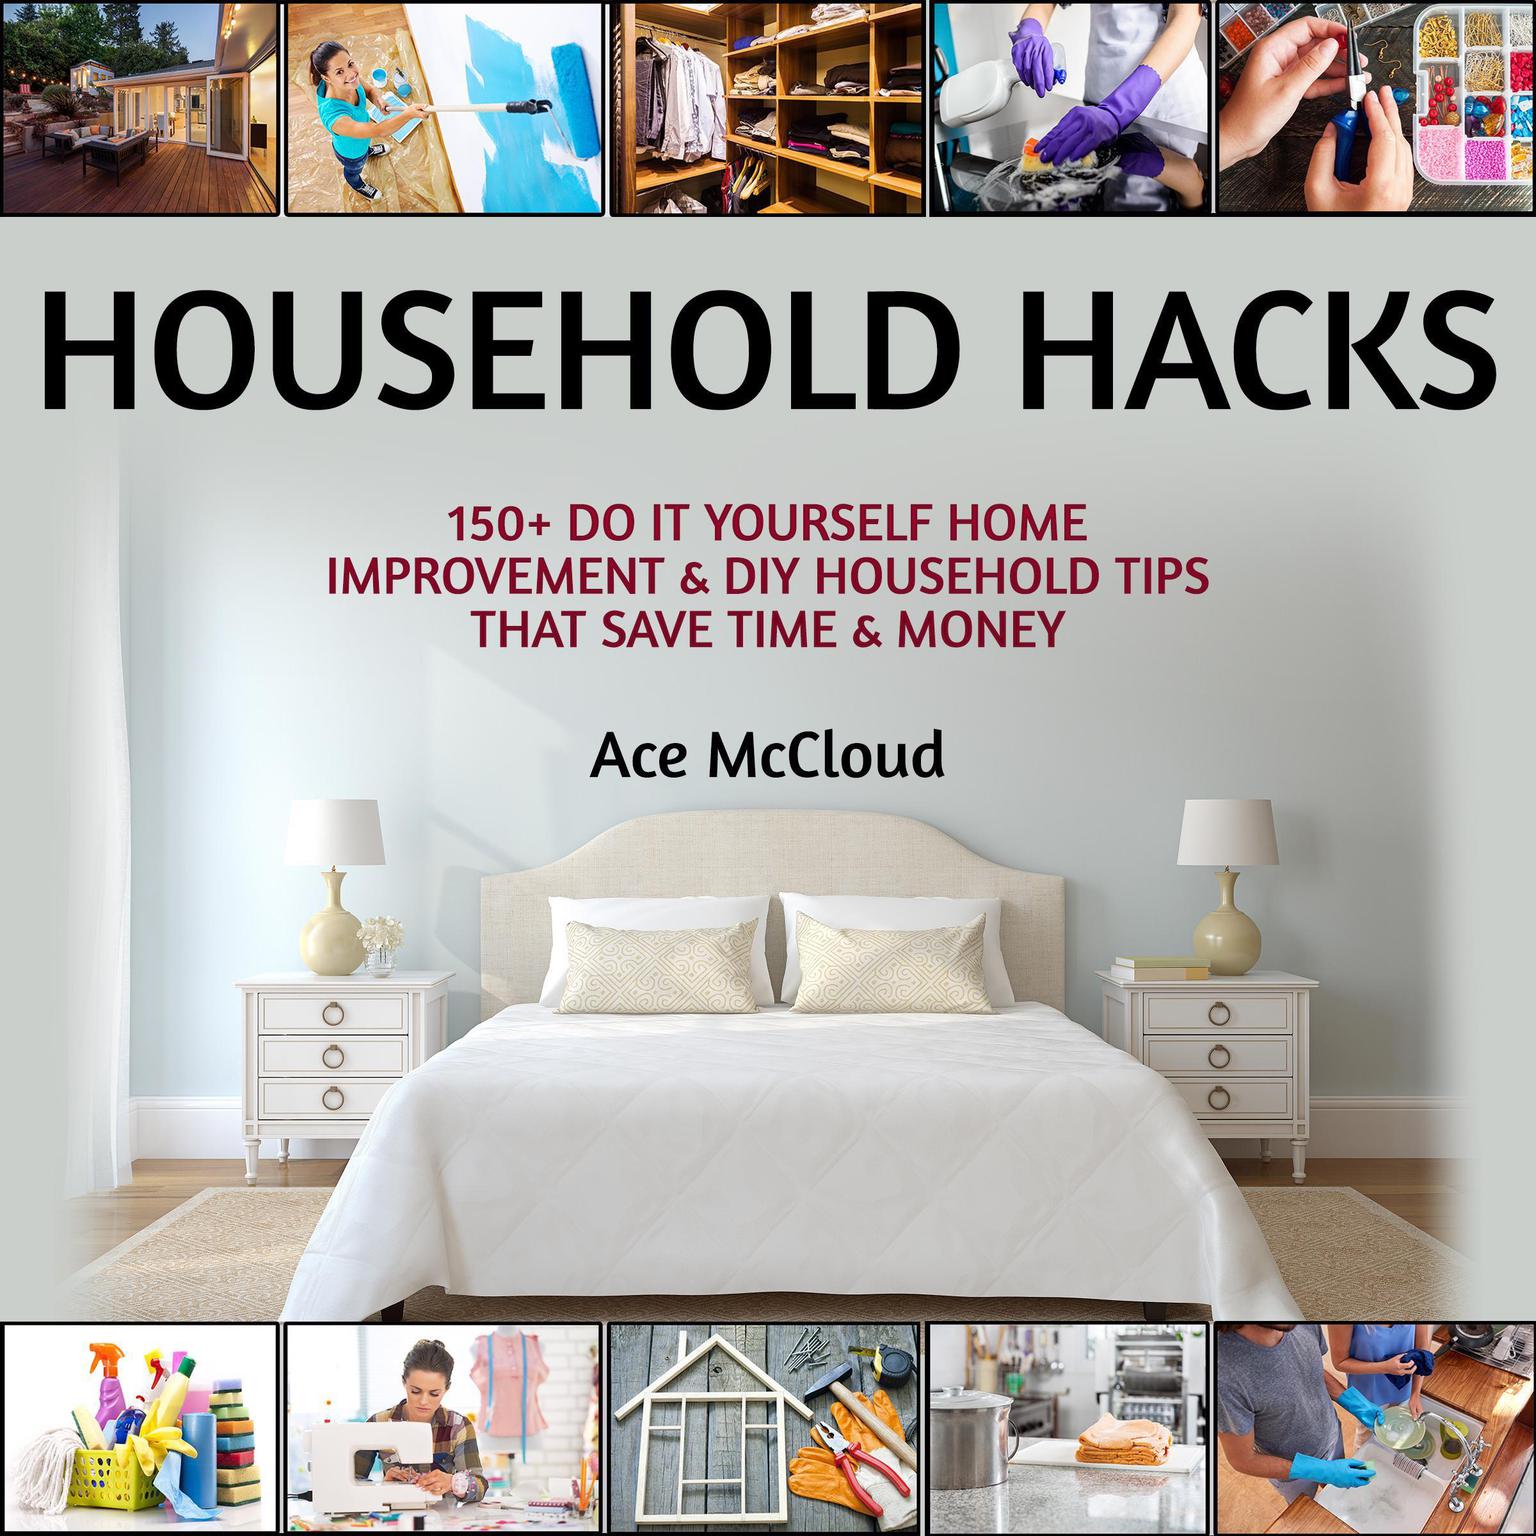 Household Hacks: 150+ Do It Yourself Home Improvement & DIY Household Tips That Save Time & Money Audiobook, by Ace McCloud